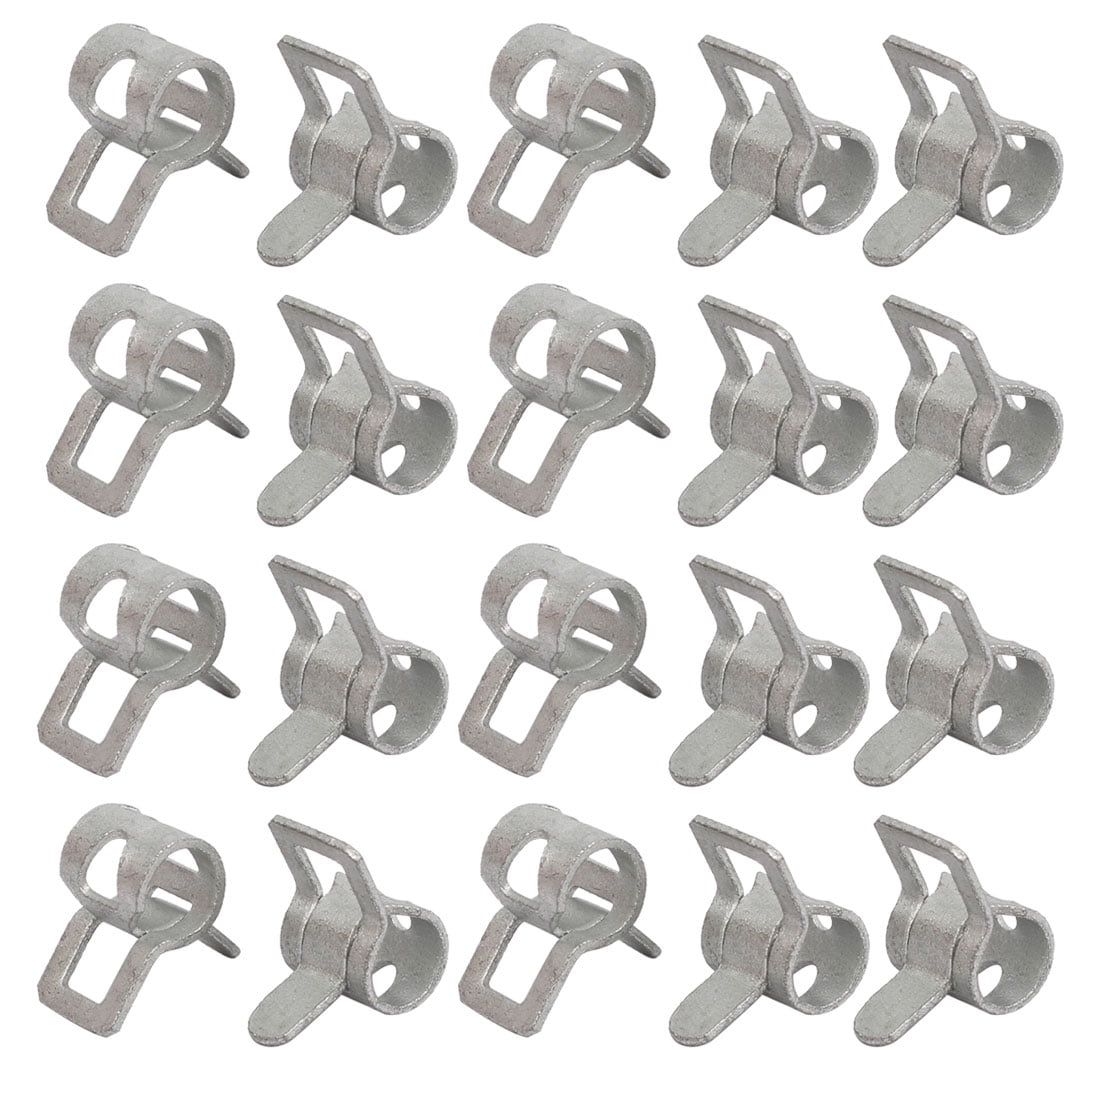 uxcell 10 Pcs 6mm Spring Type Action Fuel Hose Pipe Low Pressure Air Tube Clip Clamp 